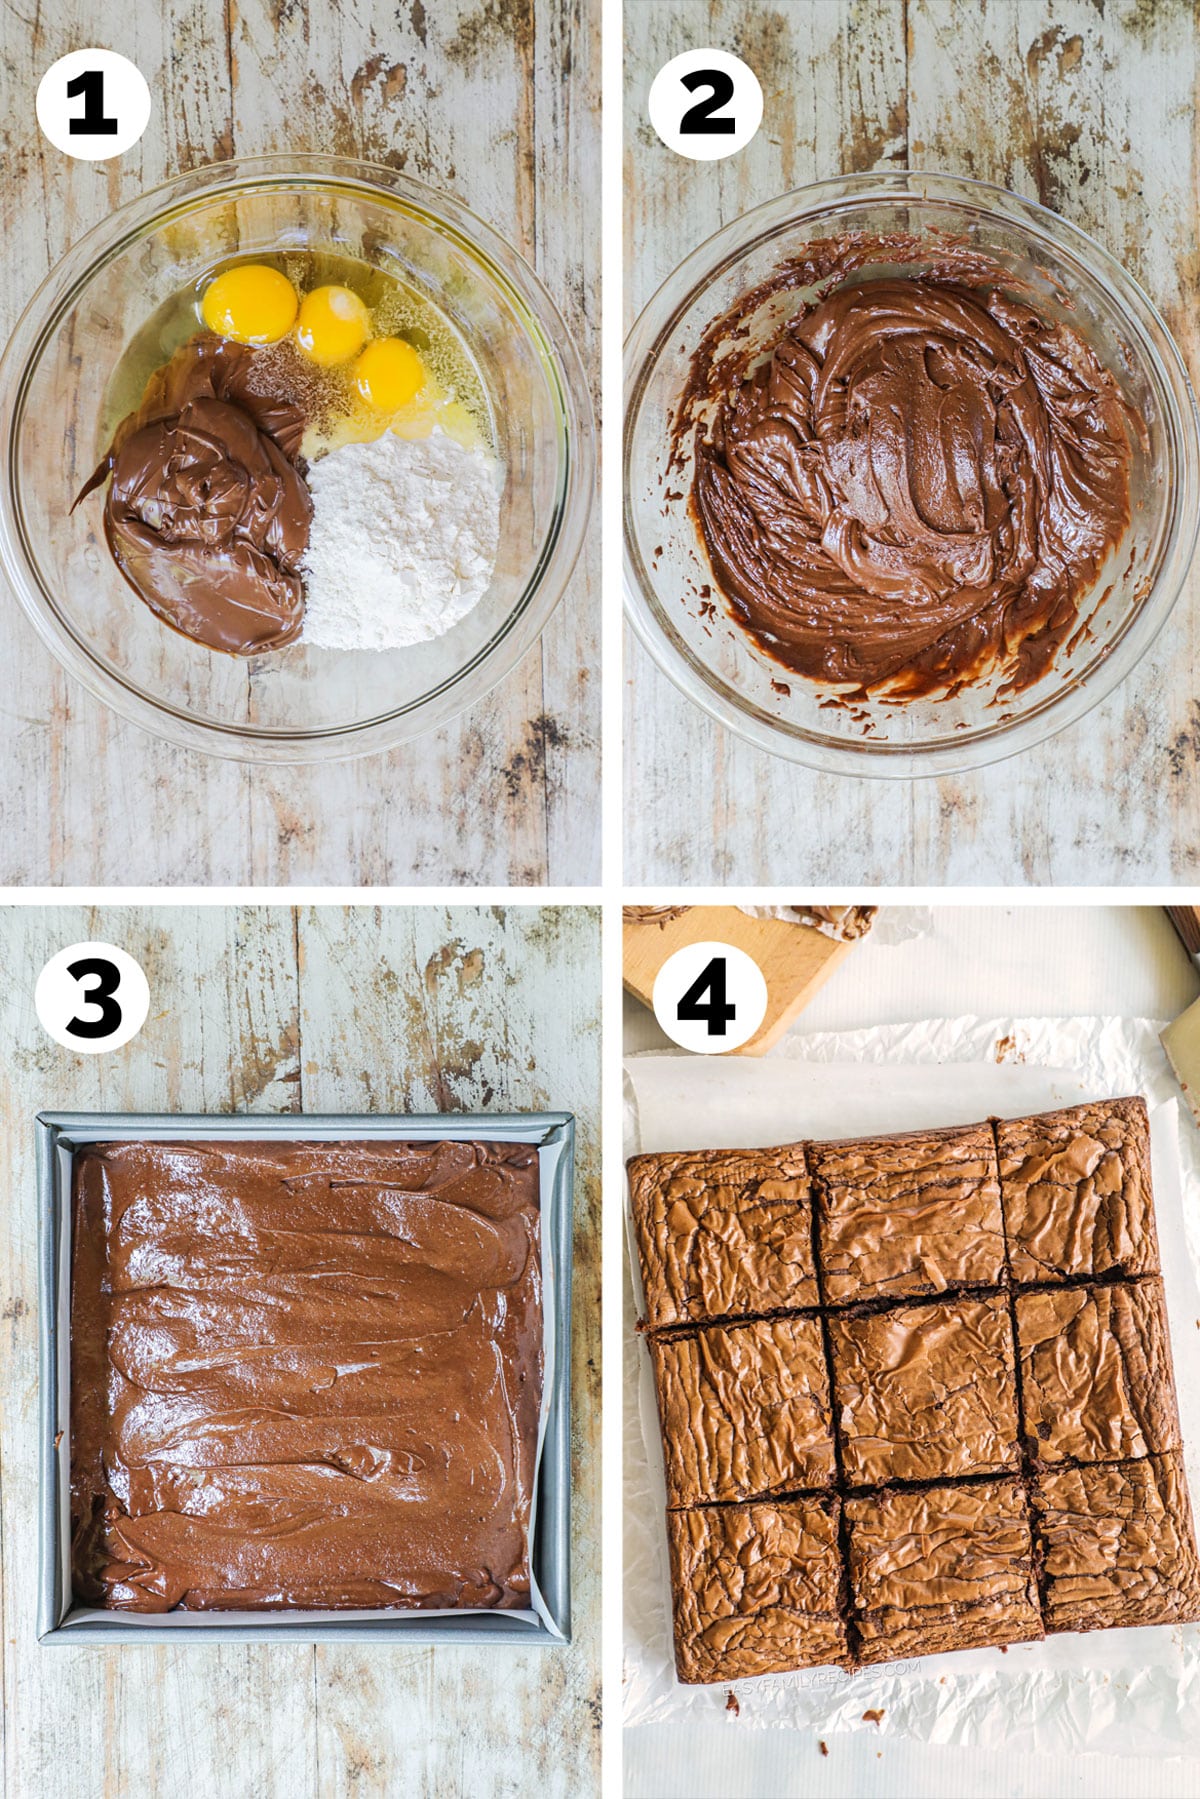 how to make Nutella brownies 1) add all ingredients to a bowl, 2) mix, 3) transfer to a baking dish, 4) bake and serve!